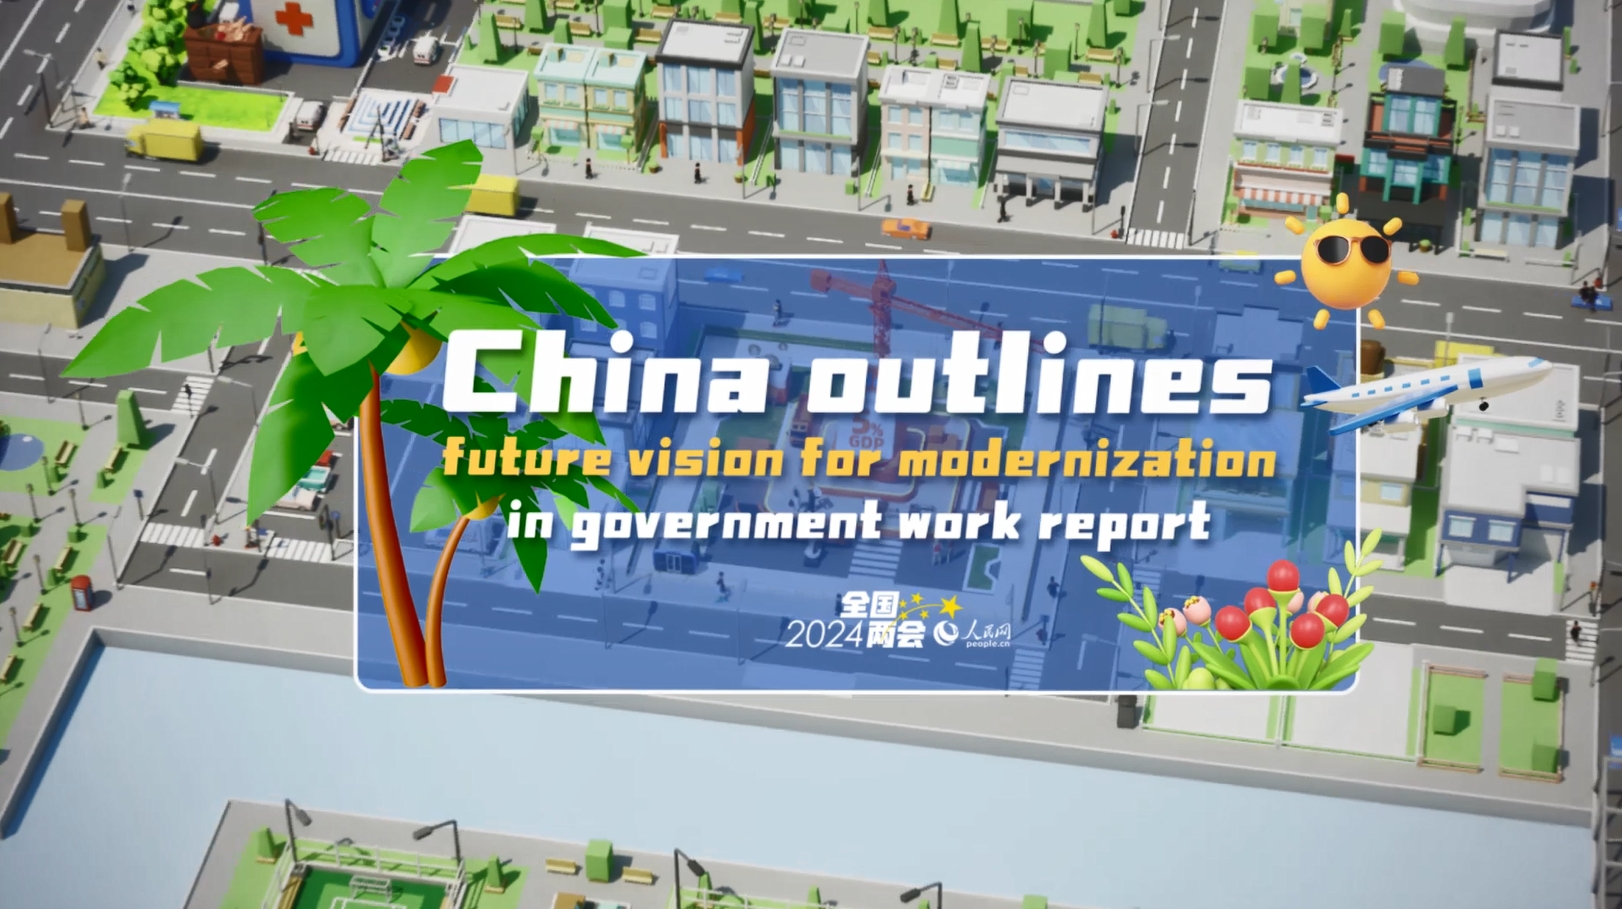 China outlines future vision for modernization in government work report